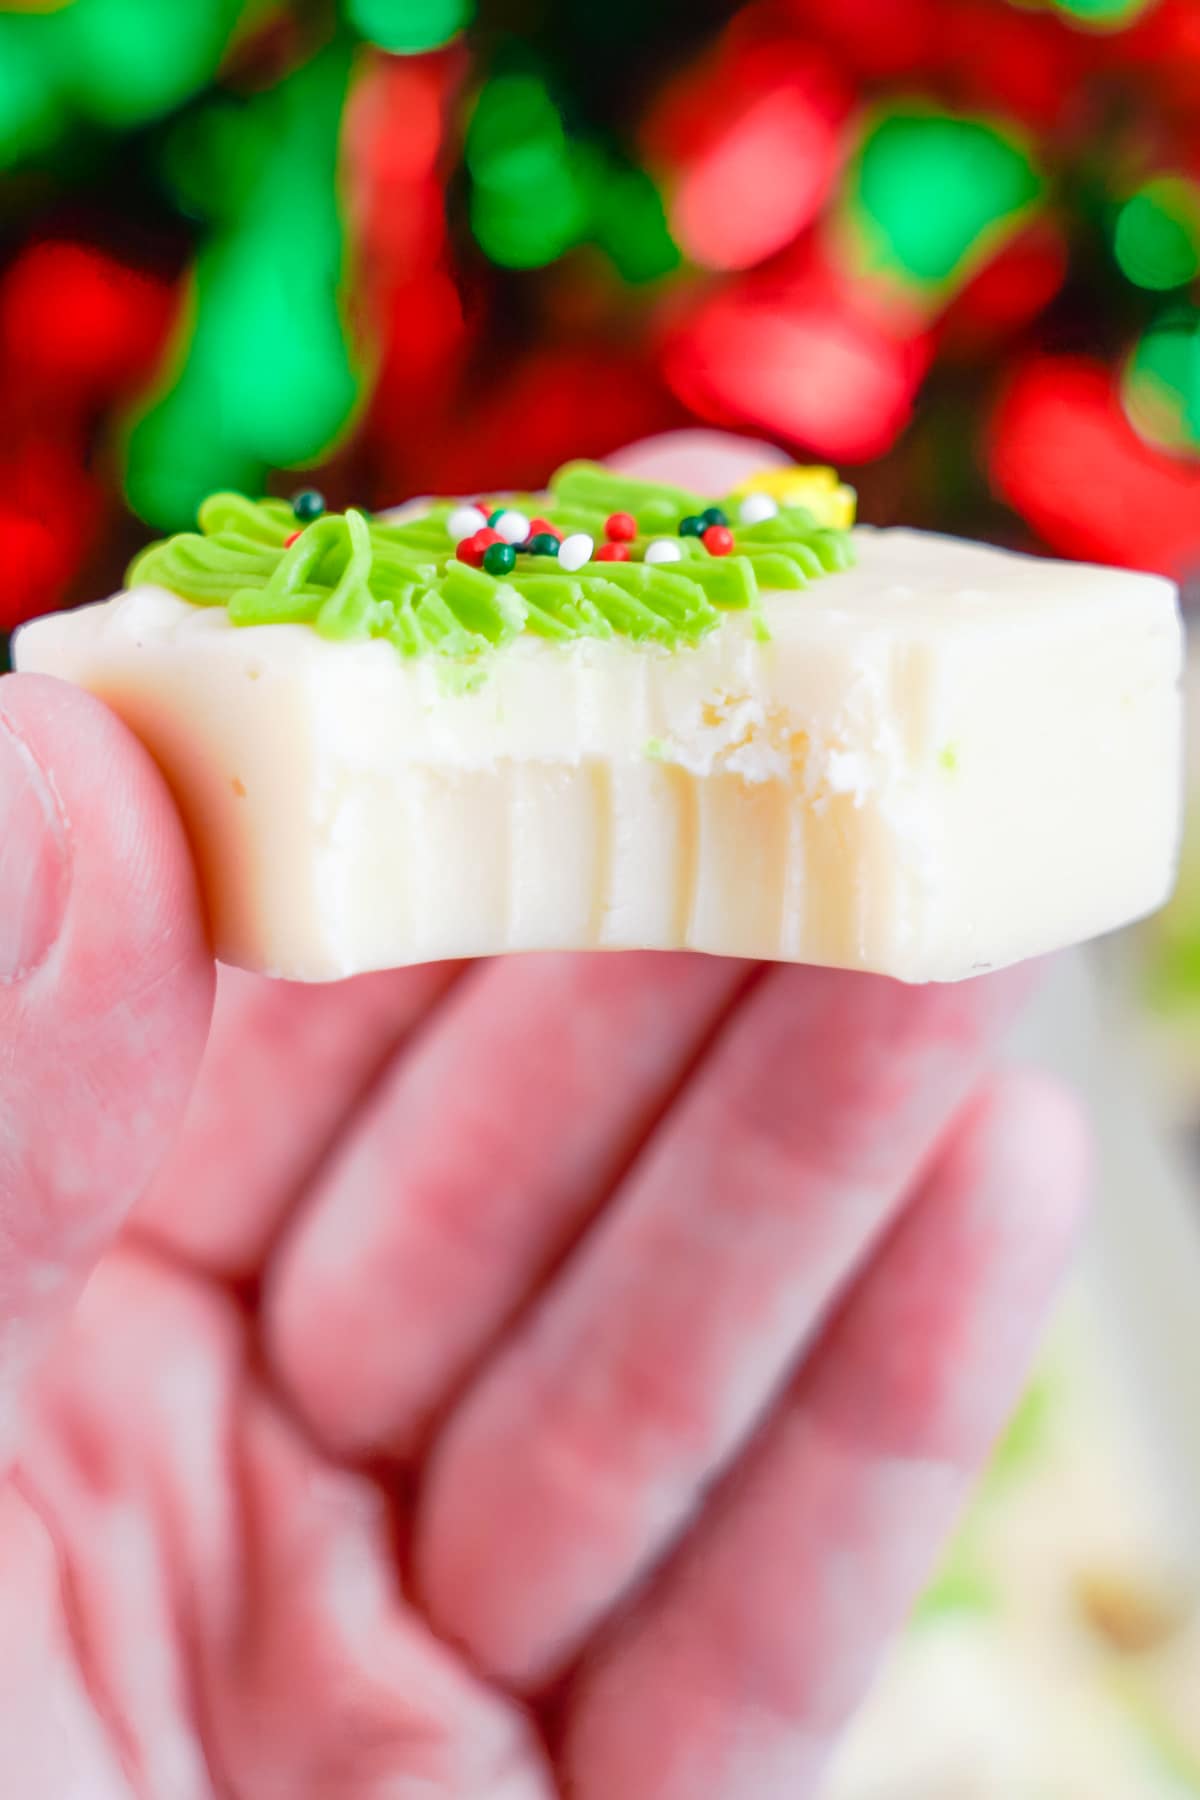 a hand holding up christmas fudge with a bite taken out